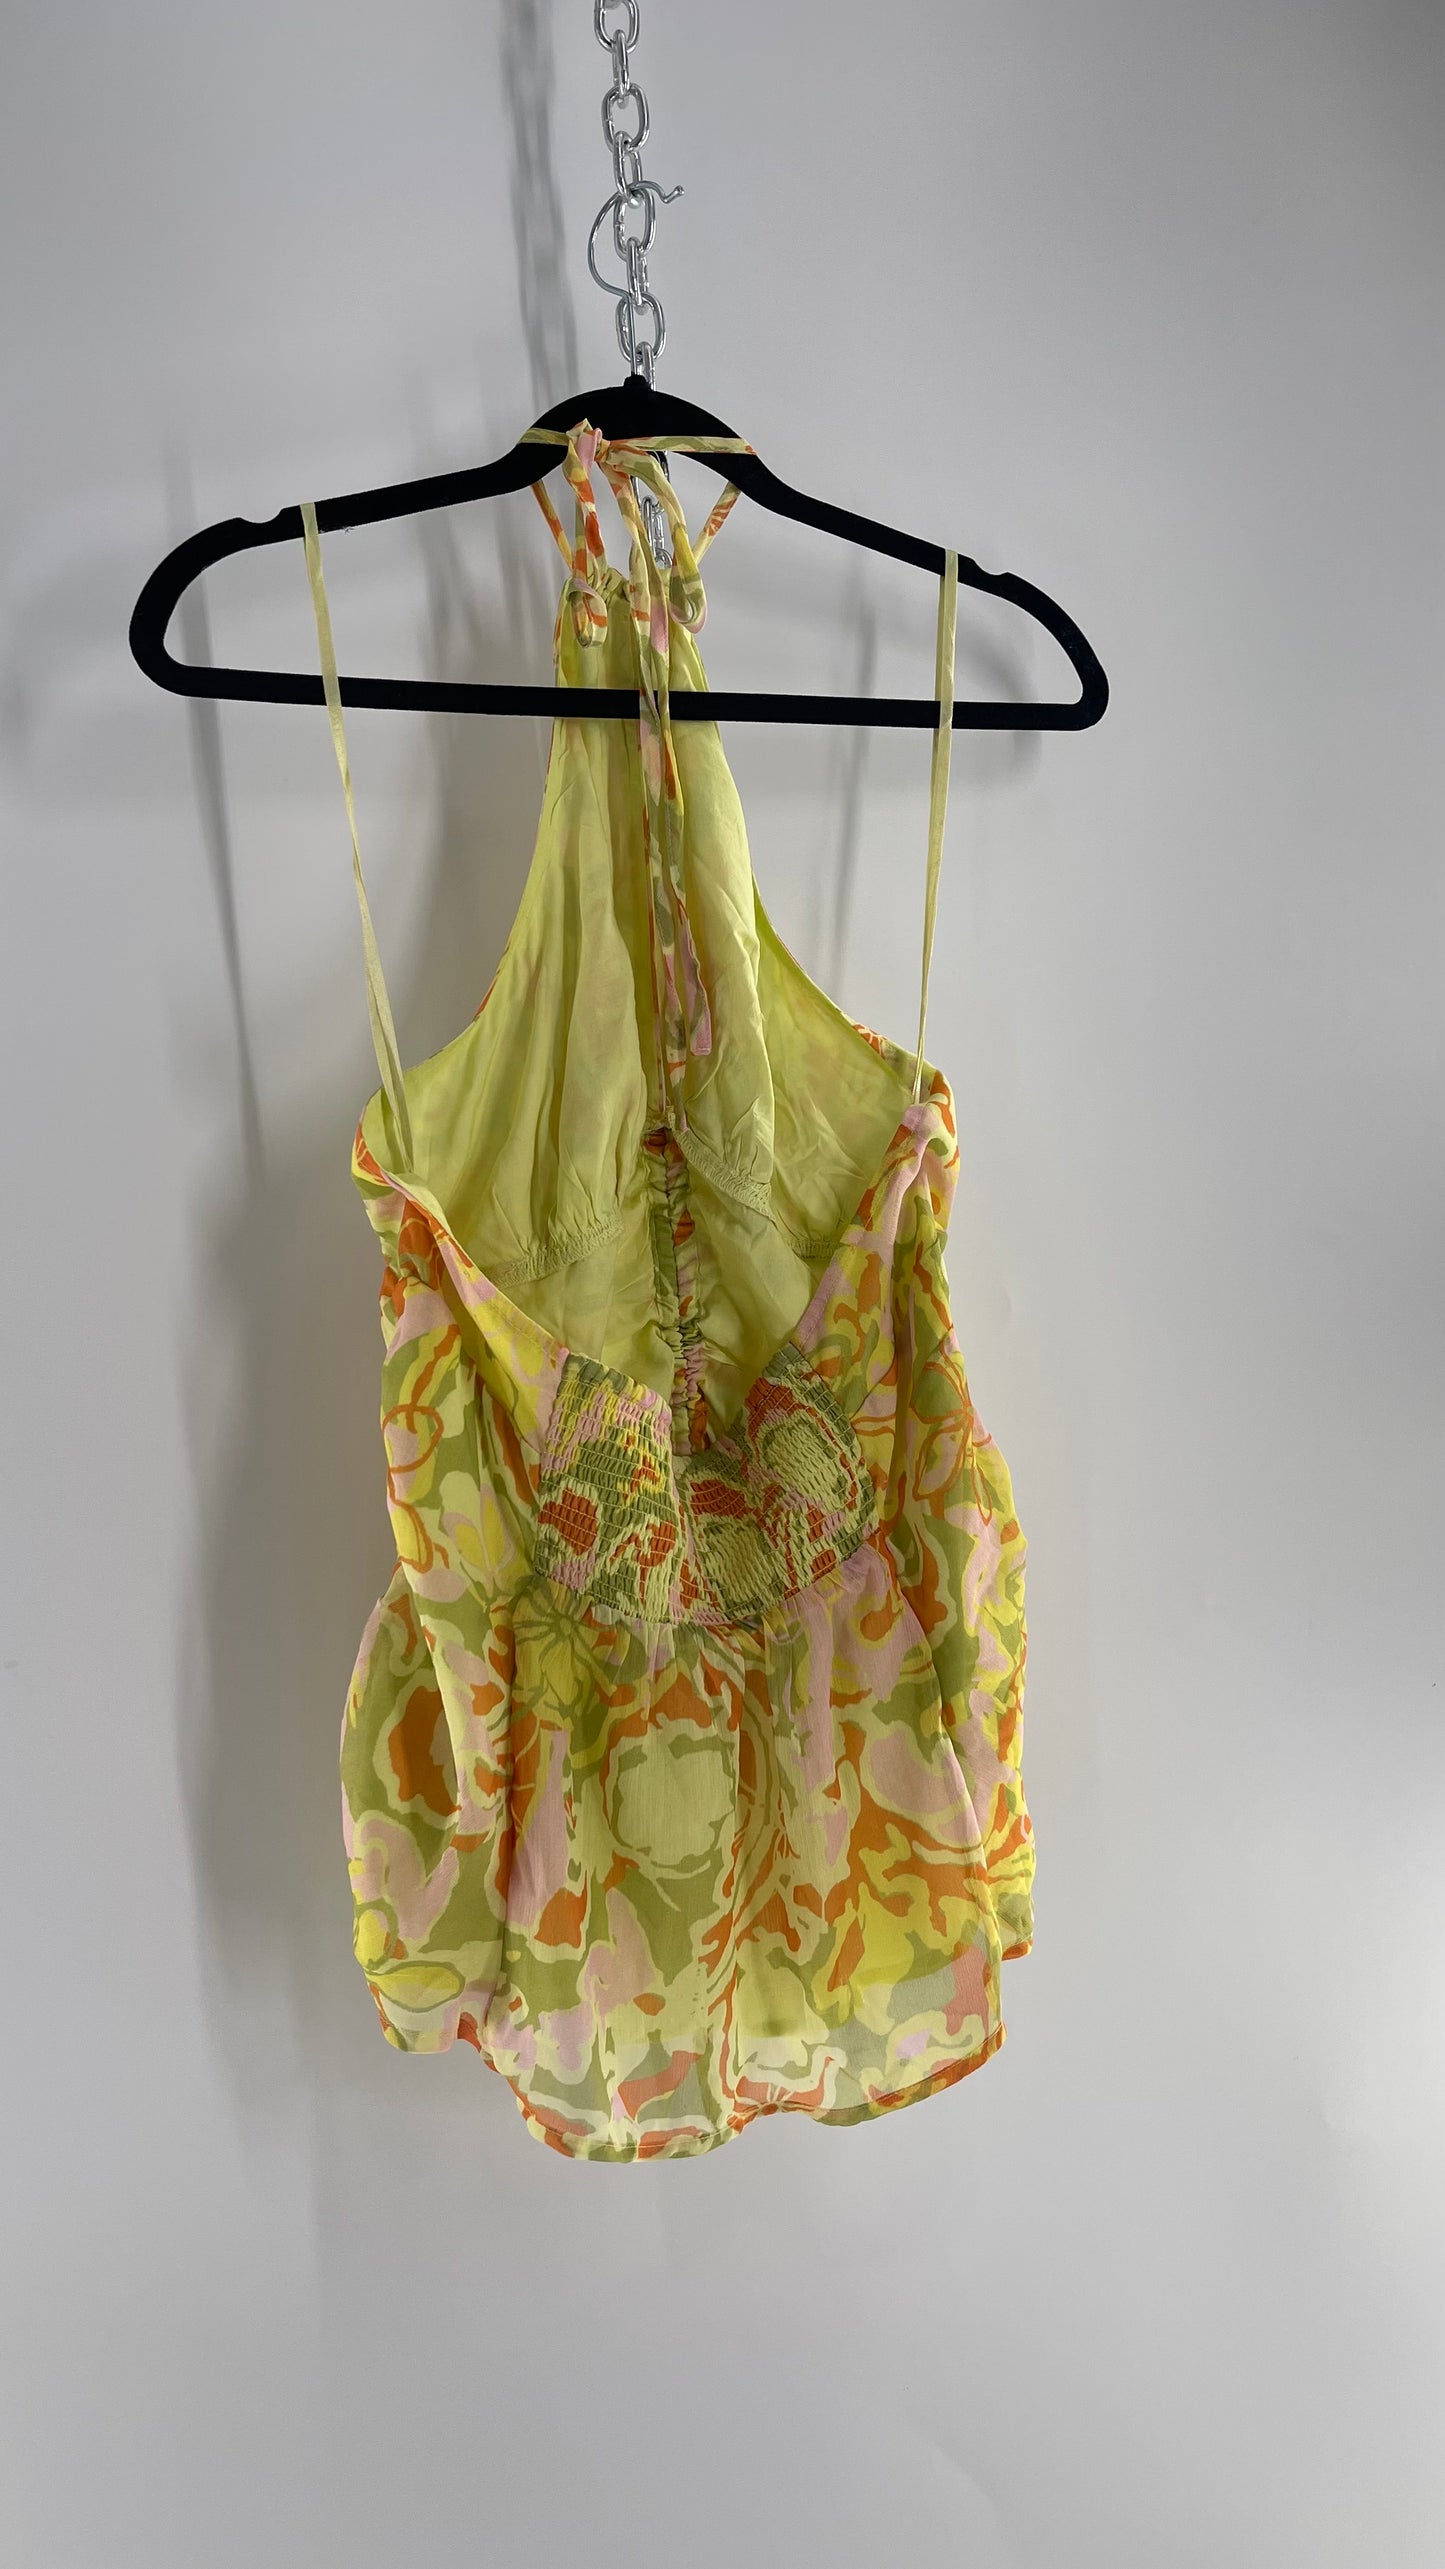 Free People Lime Green and Yellow Ruched Blouse with Cut Out Bust, Adjustable Scrunched Torso and Tie Neck Tank (Large)